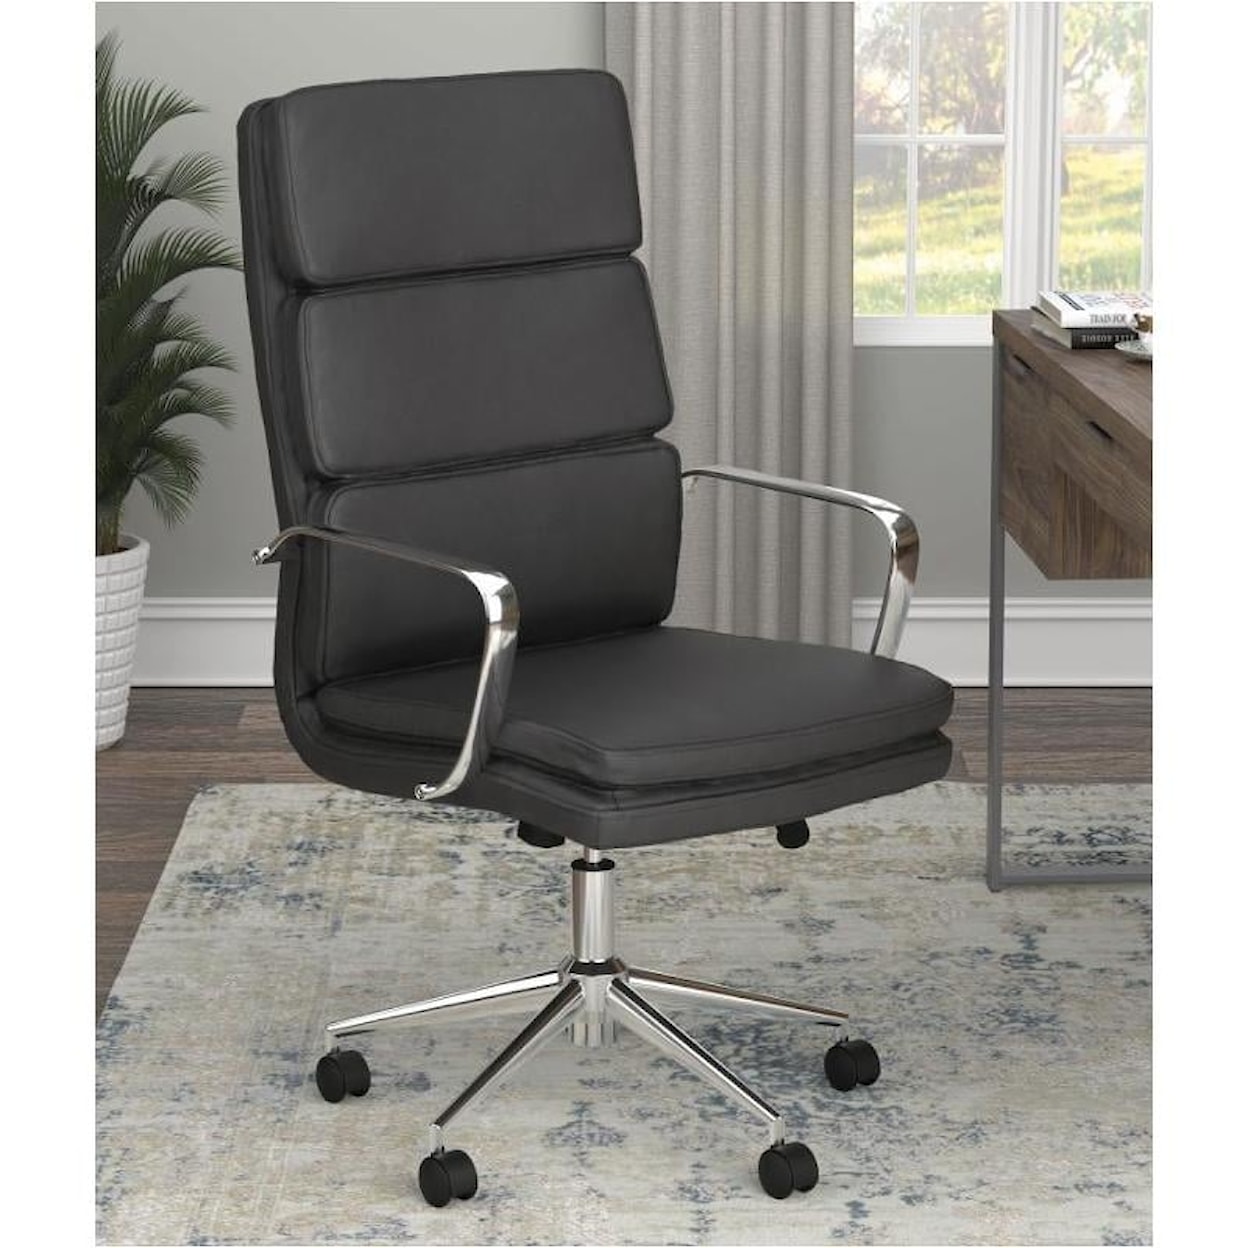 Coaster Francis Office Chair FRANCIS BLACK OFFICE CHAIR |